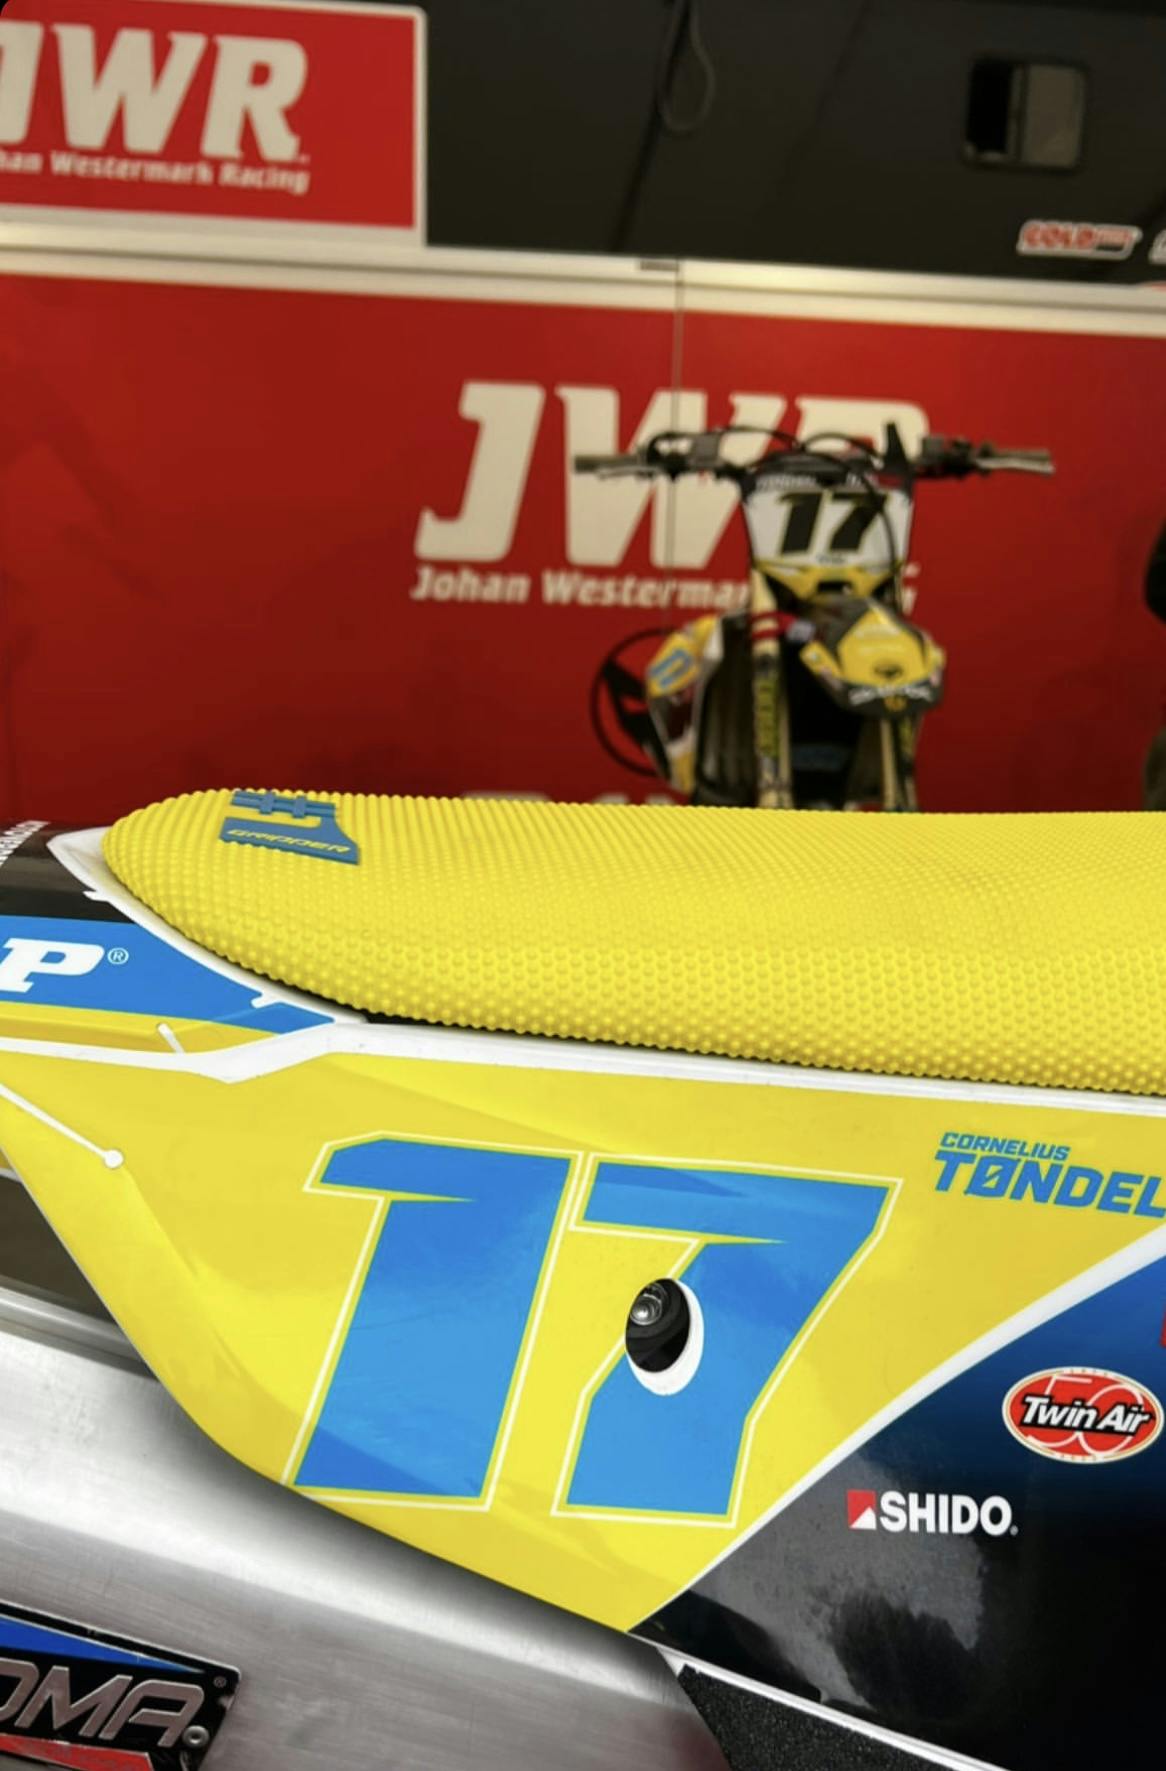 ONEGRIPPER Seat Cover - MXGP of SWEDEN - JWR HONDA EDITION